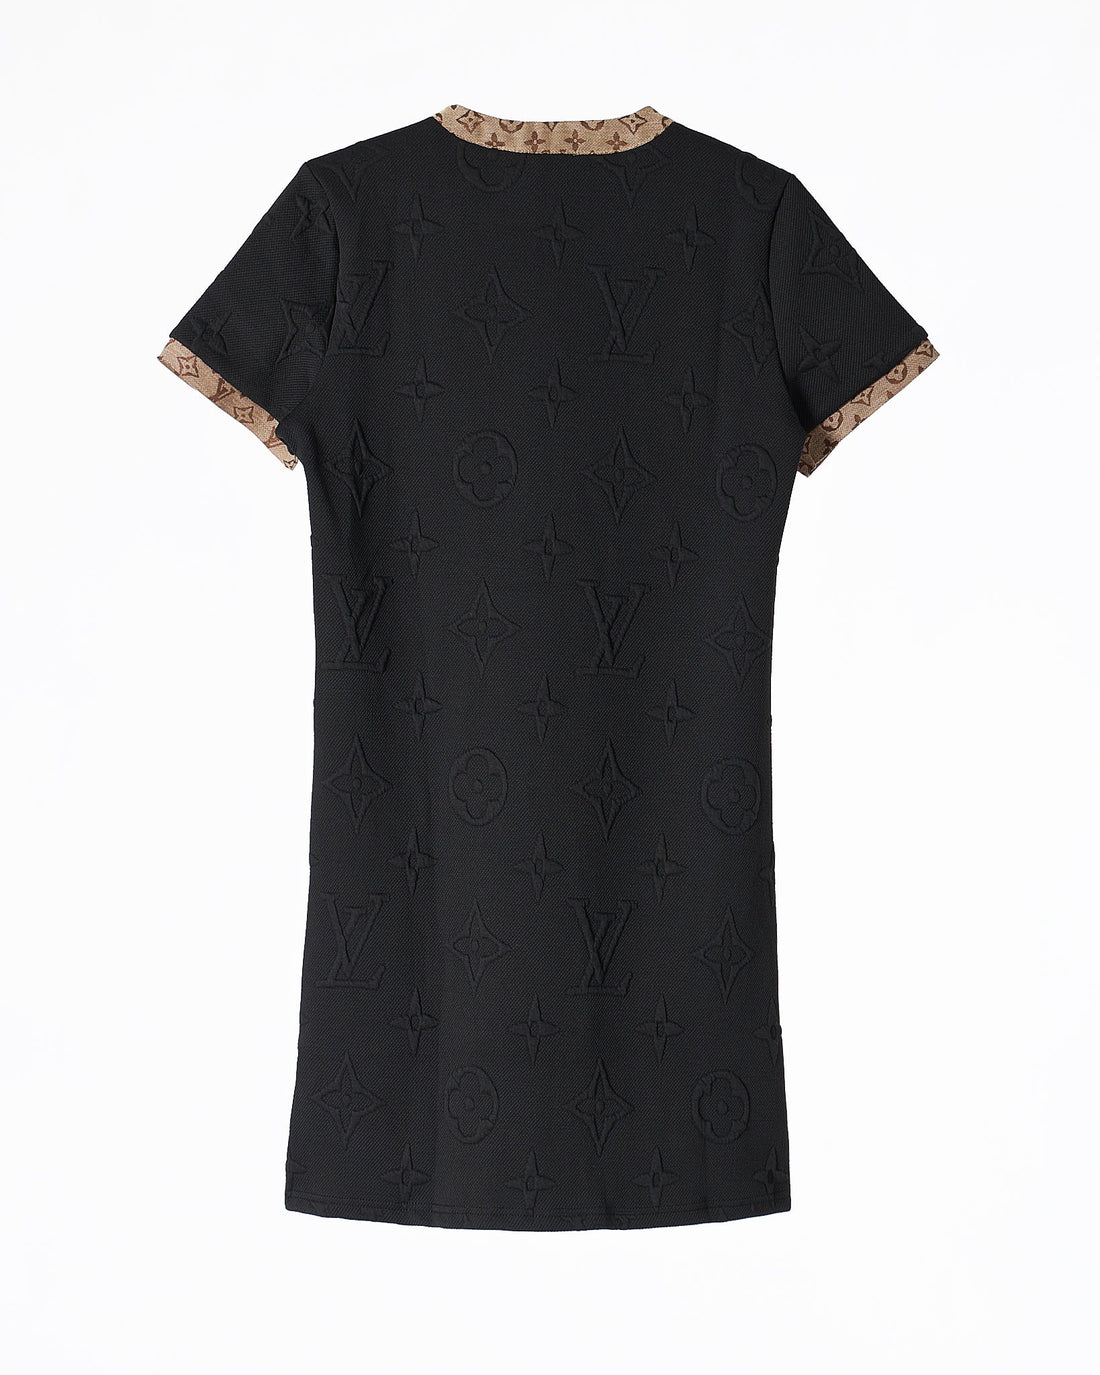 MOI OUTFIT-LV Monogram Lady Embossed Black Dress 59.90